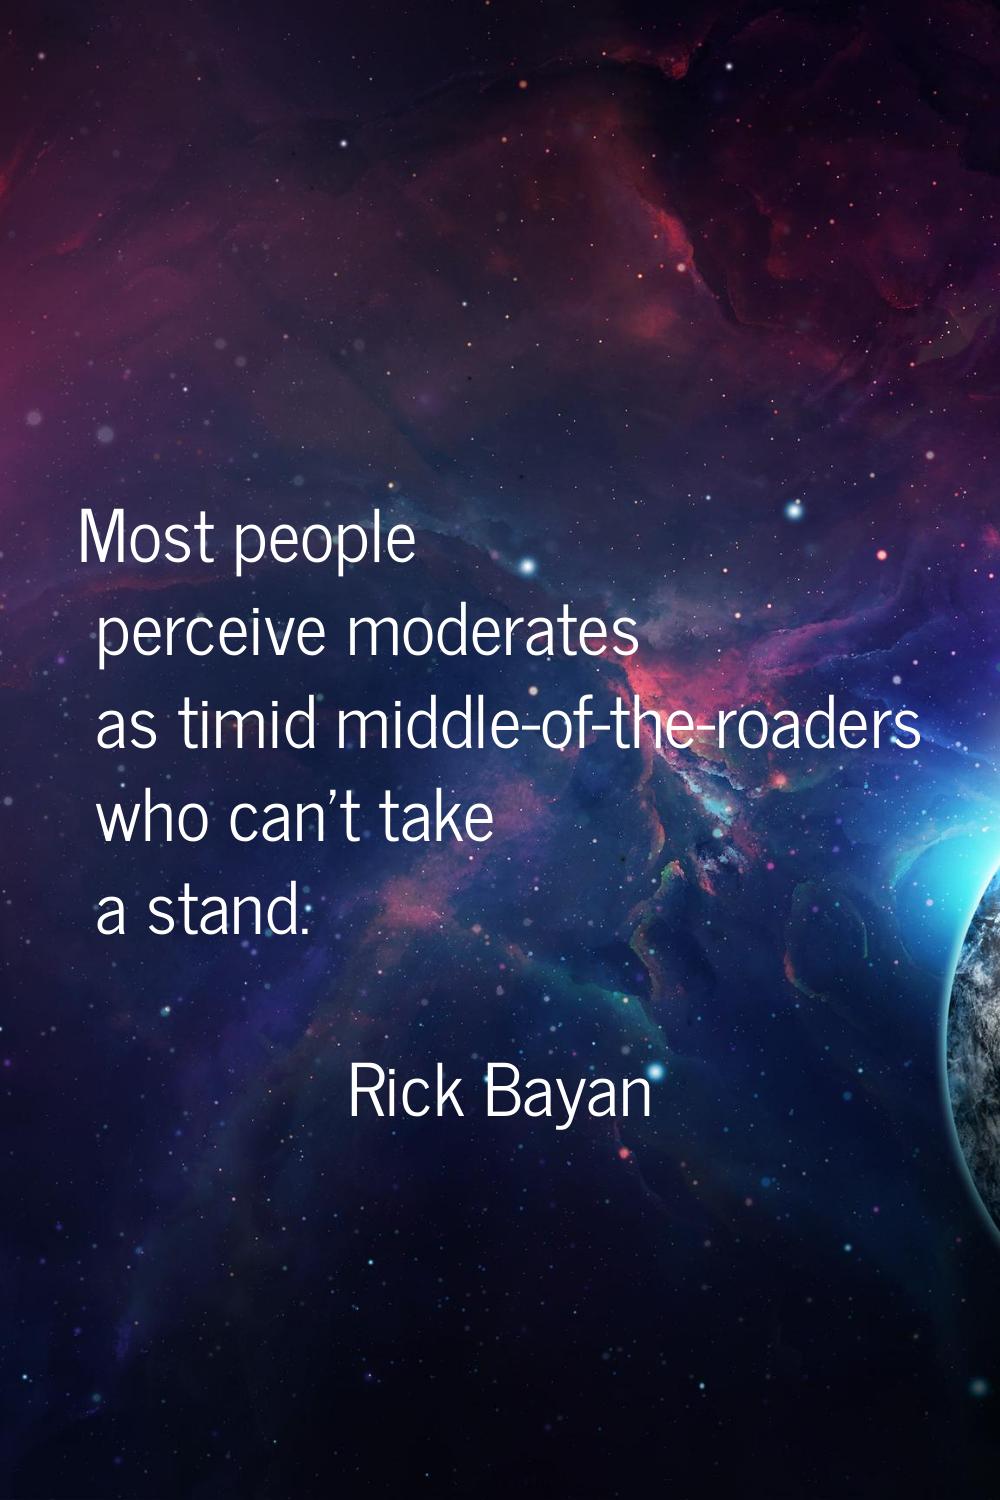 Most people perceive moderates as timid middle-of-the-roaders who can't take a stand.